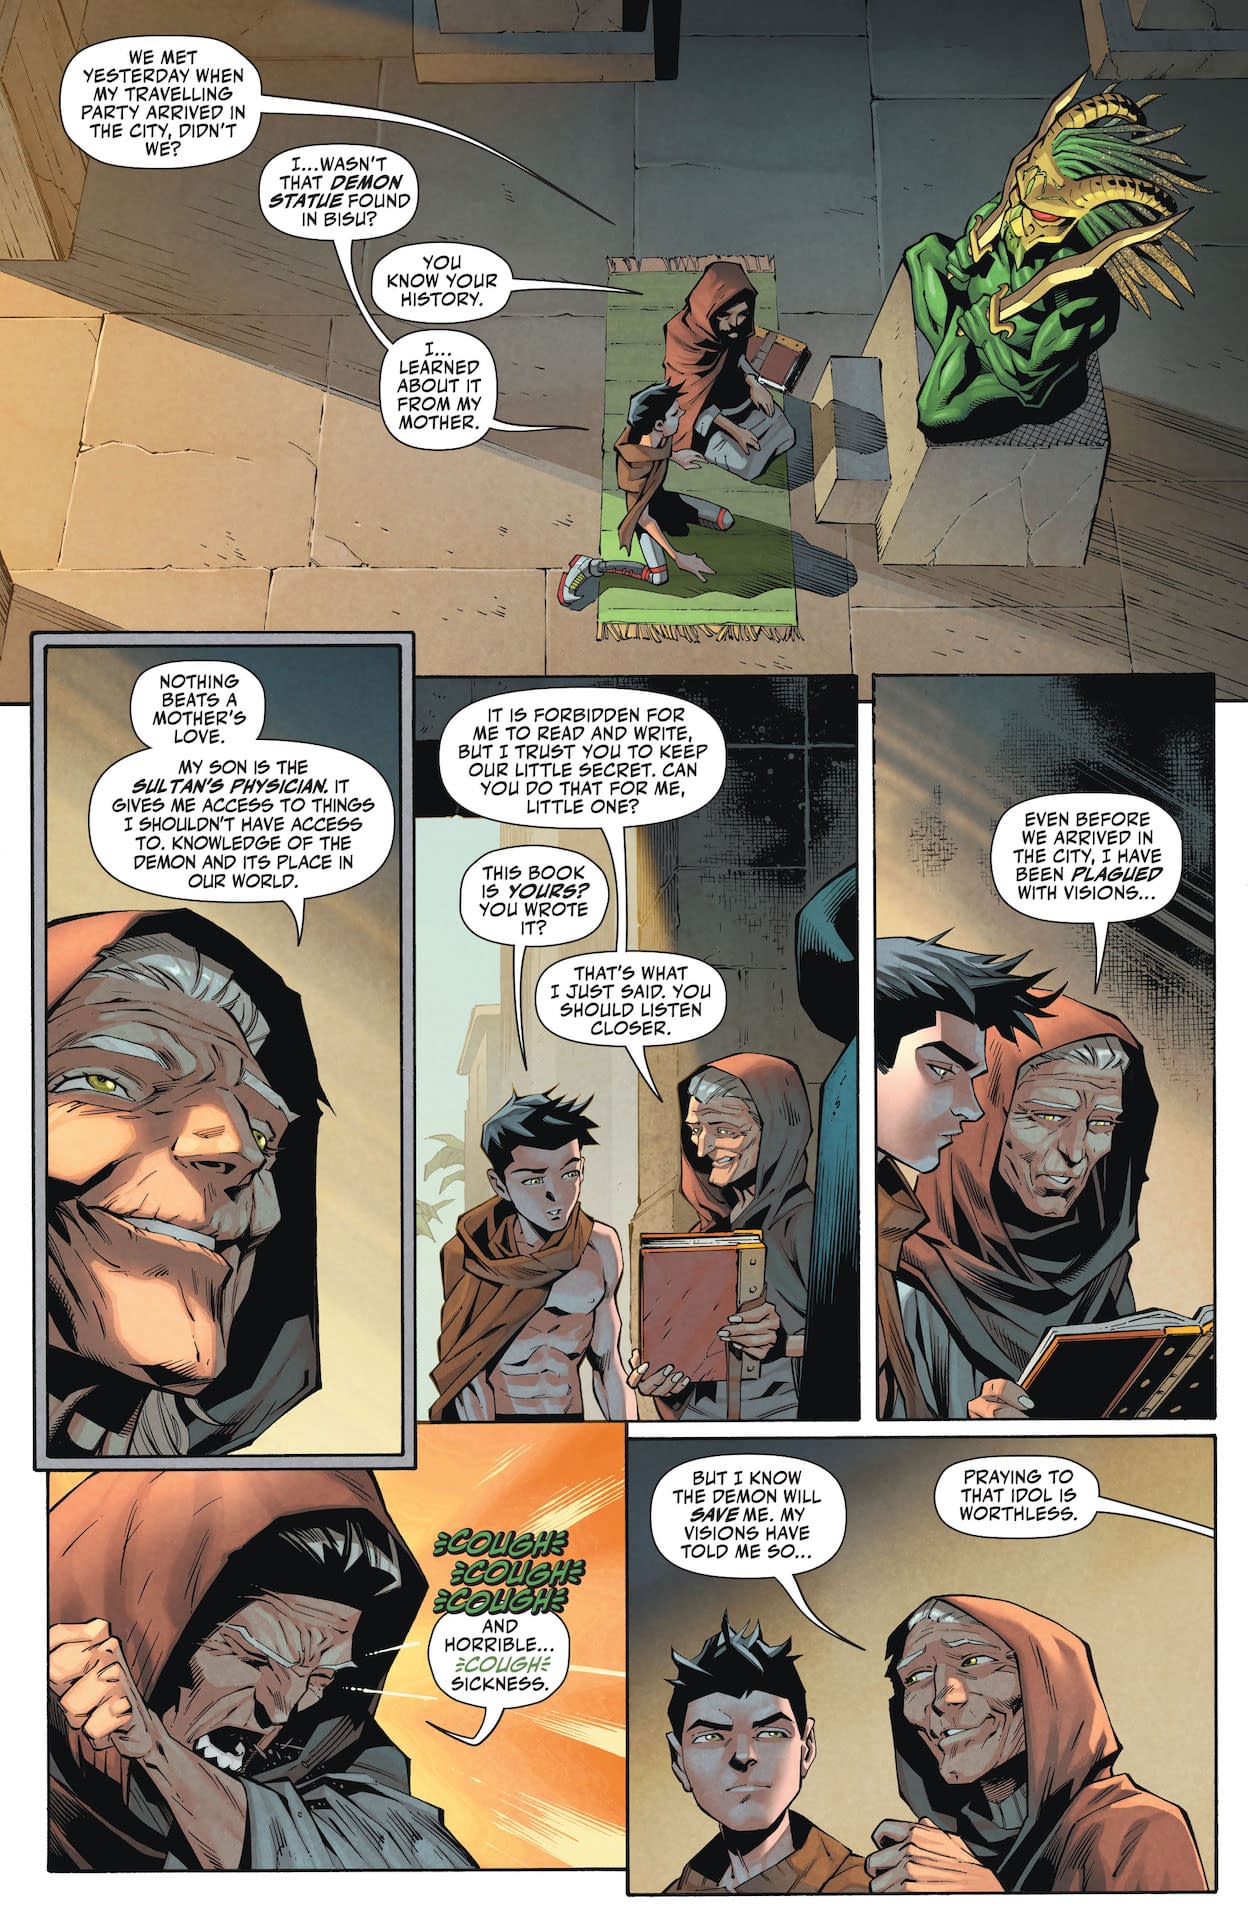 Interior preview page from Robin #10